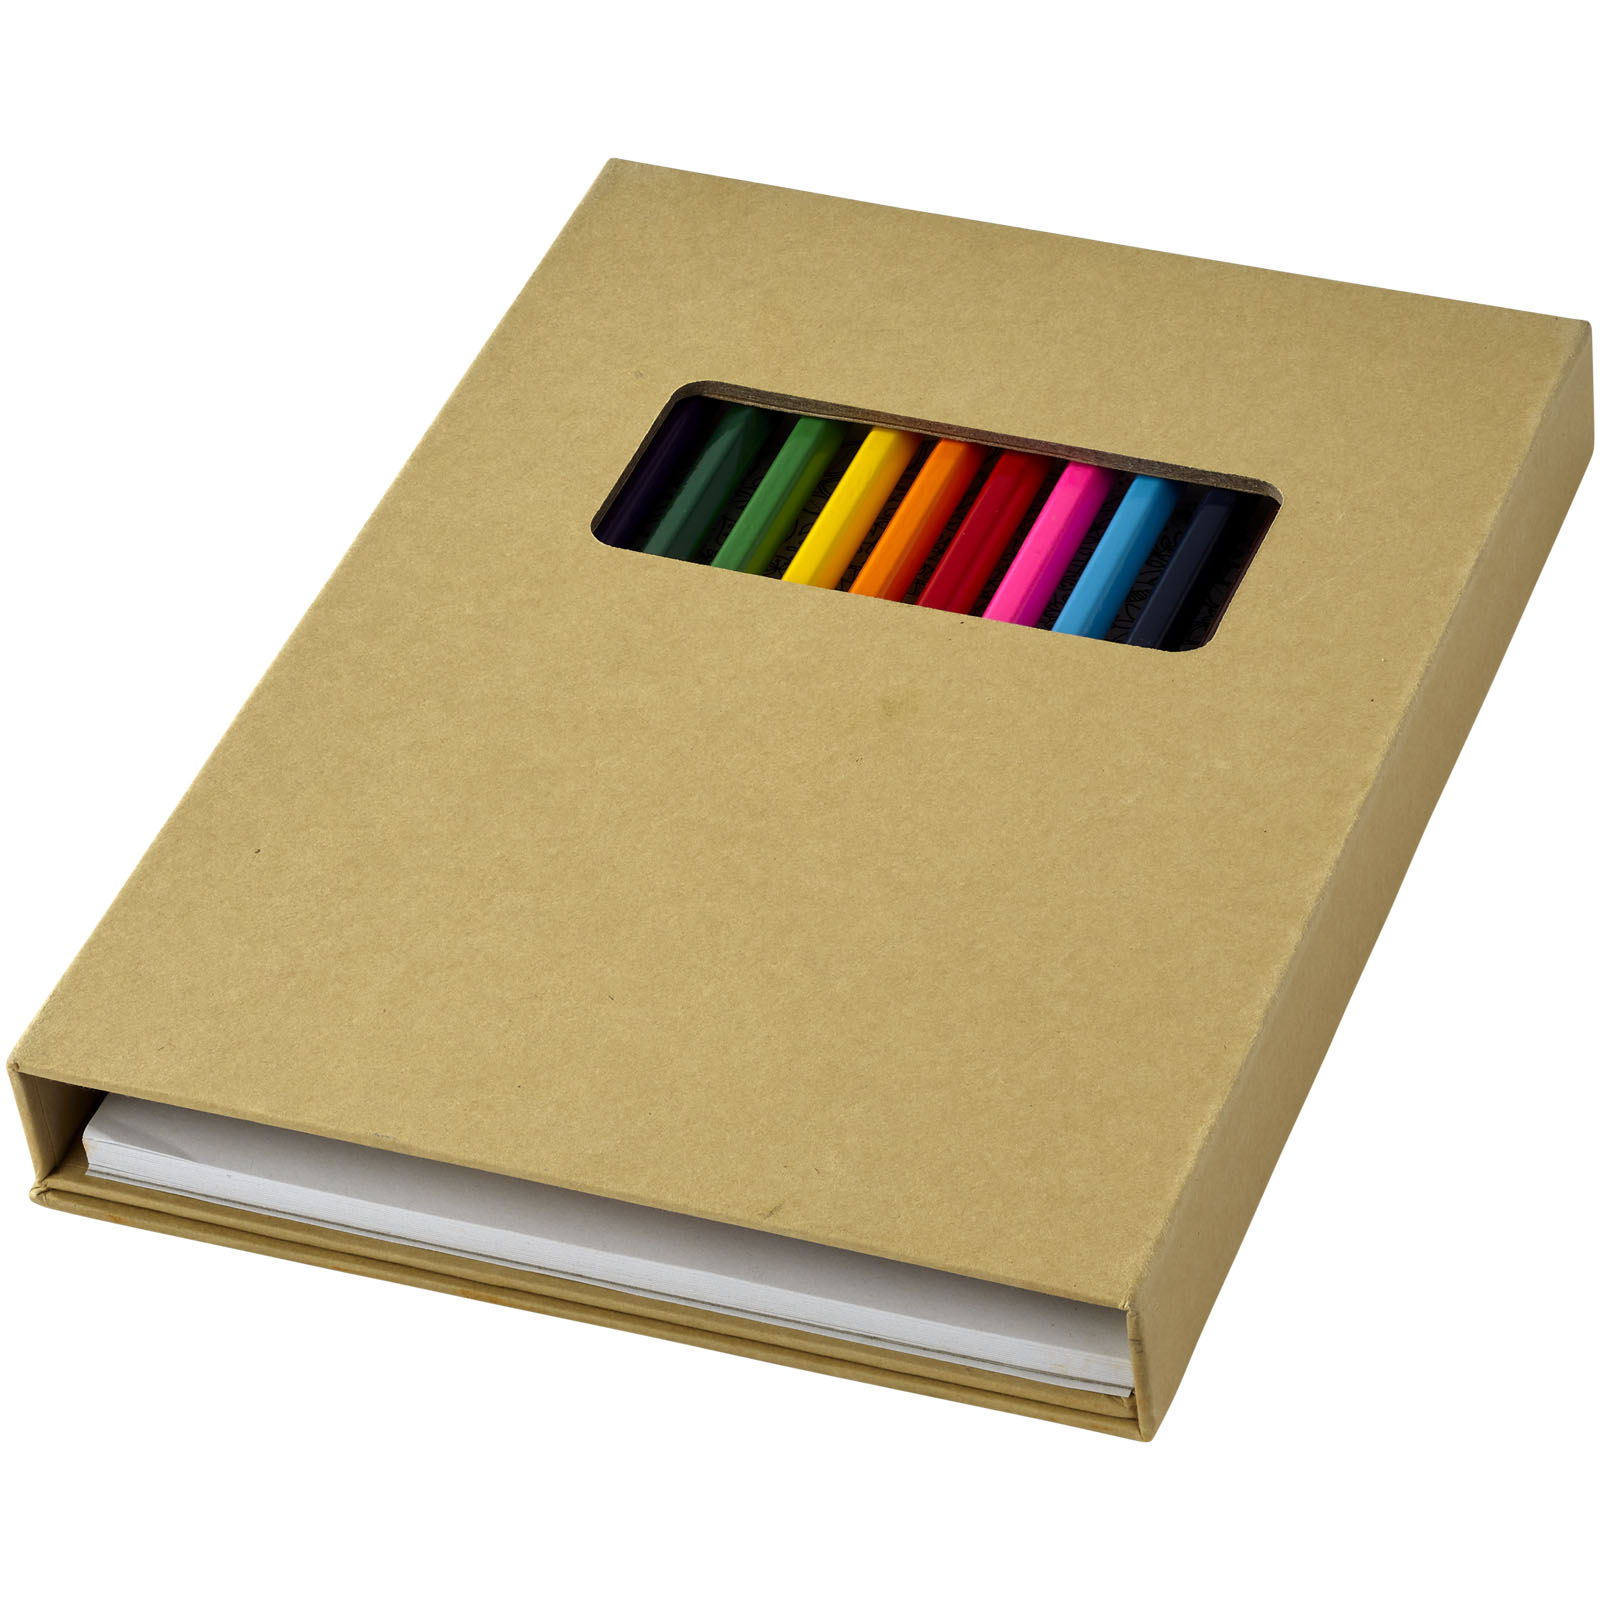 Pens & Writing - Pablo colouring set with drawing paper